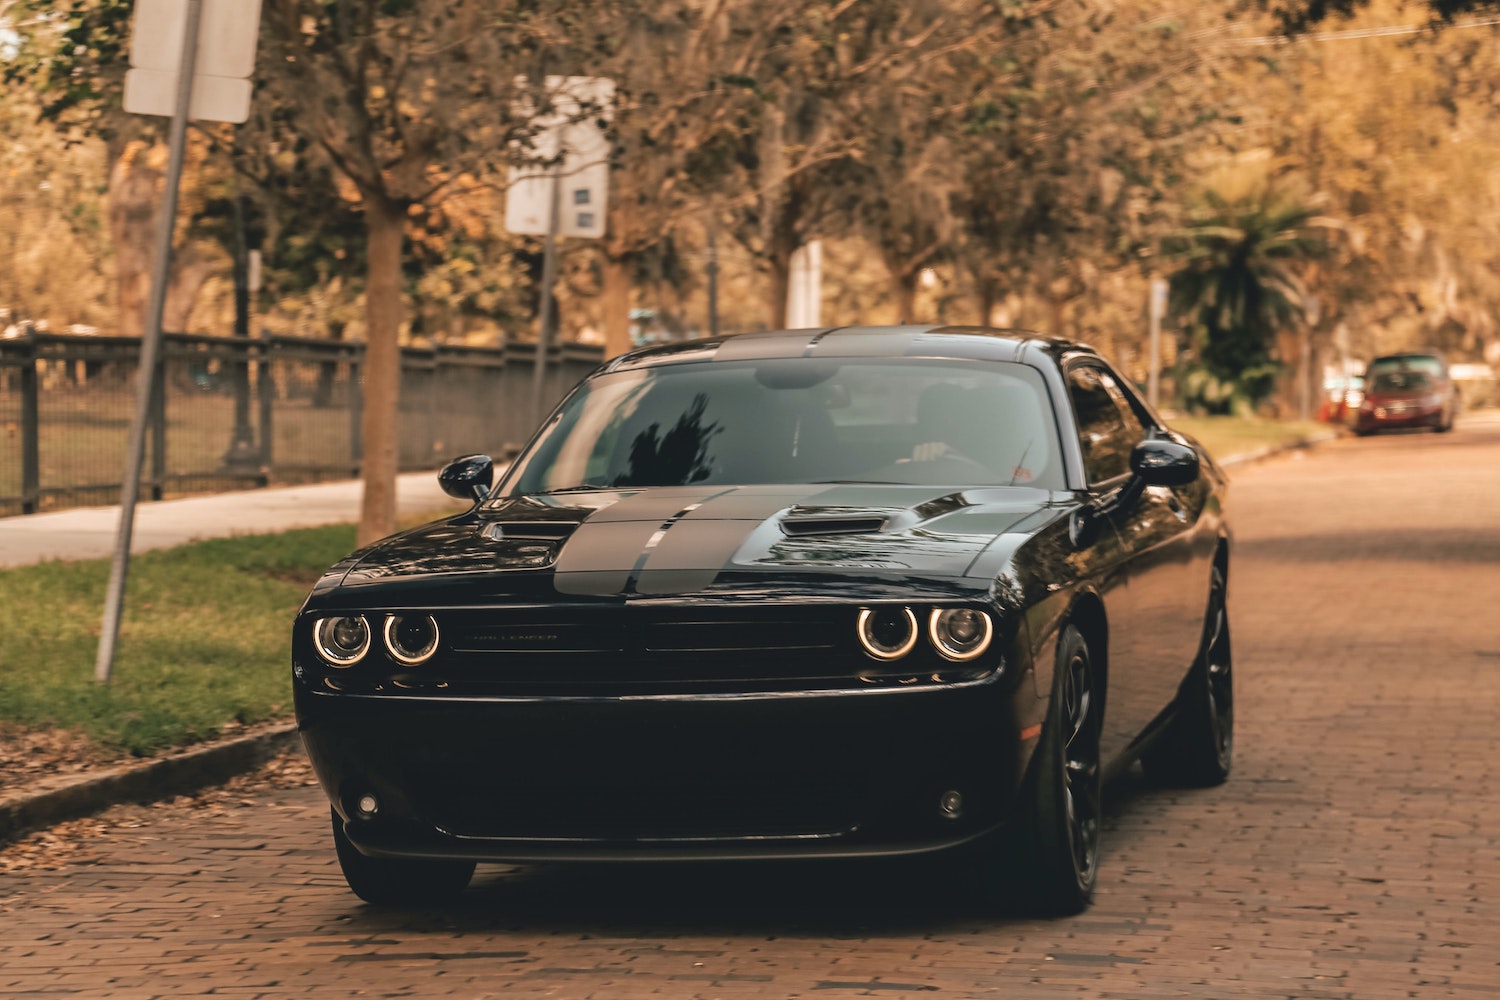 Black Dodge Challenger muscle car driving along a tree-lined residential street.